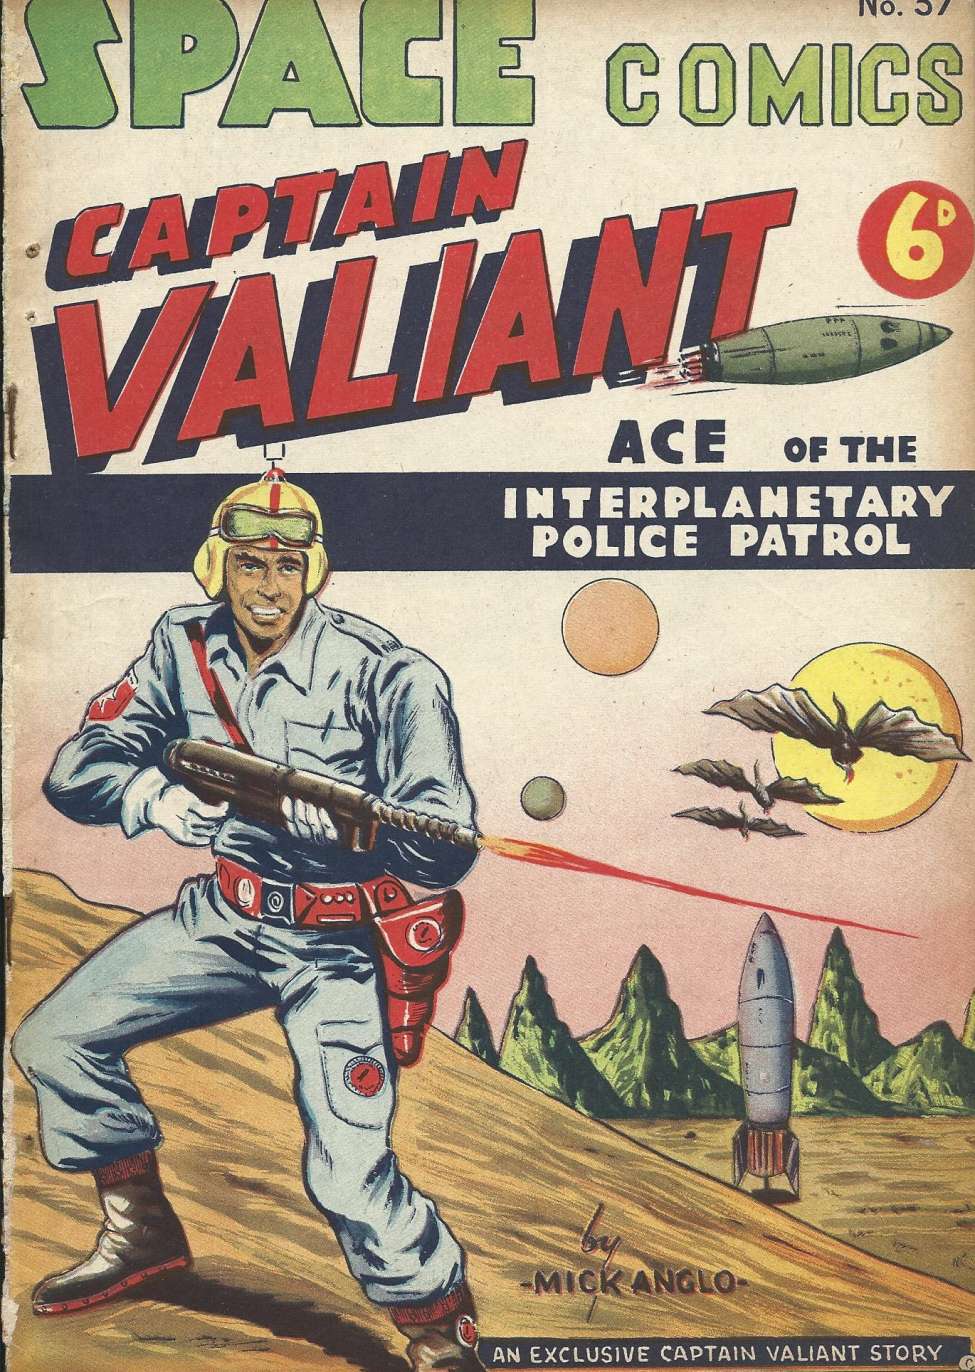 Comic Book Cover For Space Comics (Captain Valiant) 57